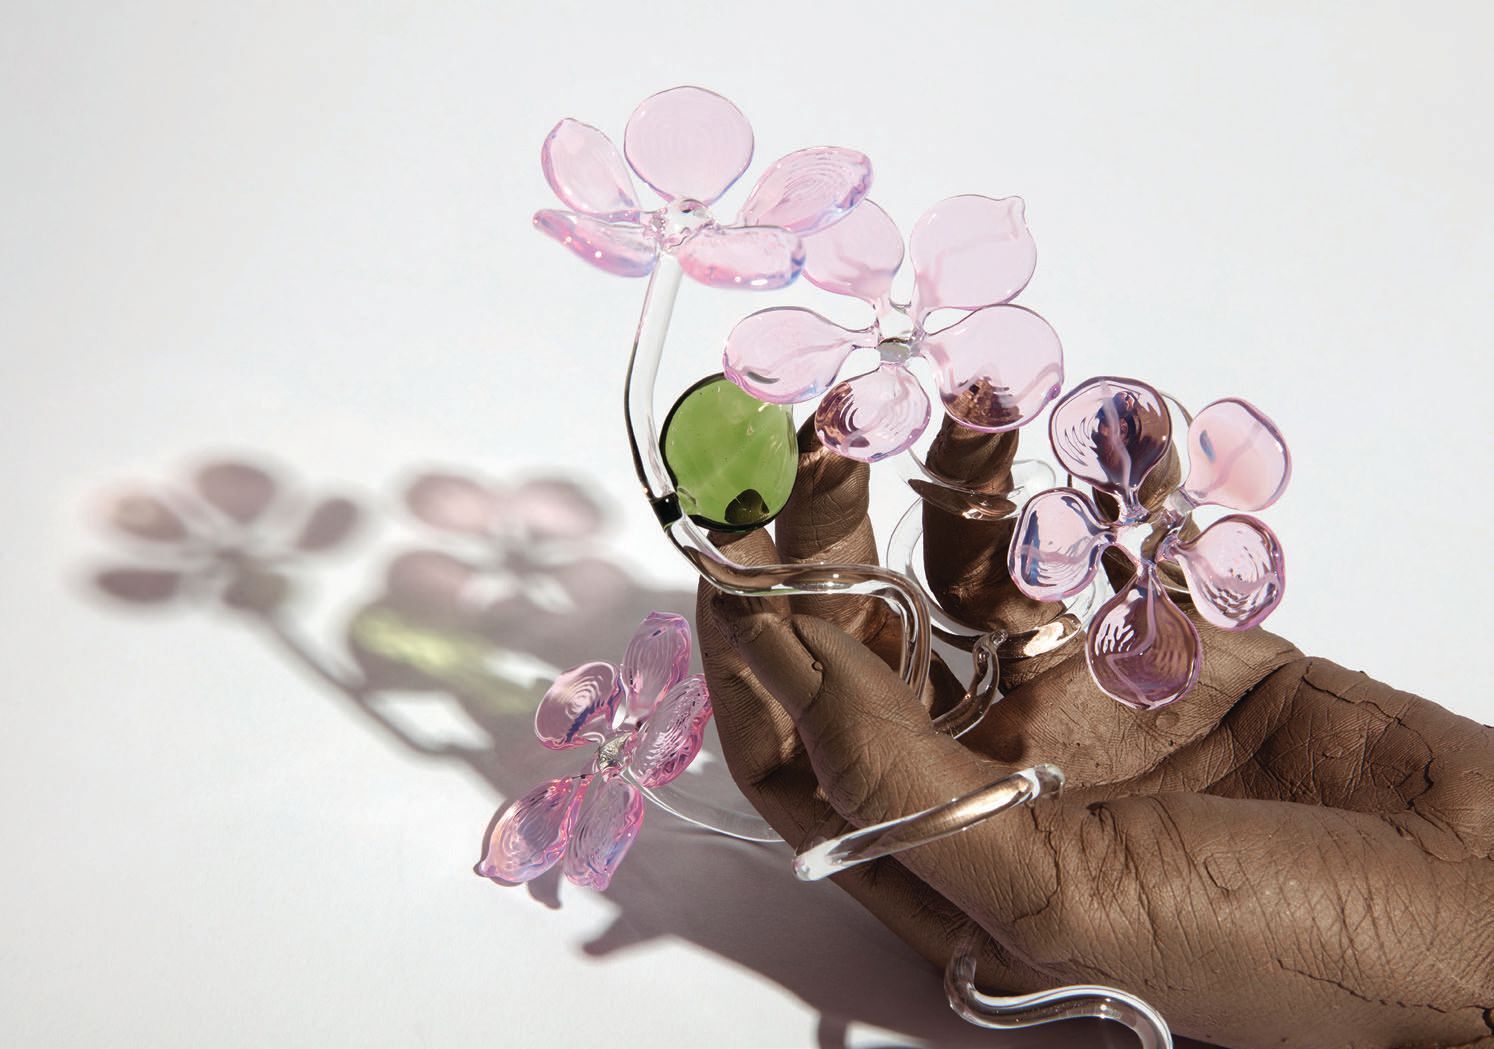 Kelly Akashi, “Cultivator (Hanami)” (2021, flame-worked borosilicate glass, bronze) PHOTO COURTESY OF THE MUSEUM OF CONTEMPORARY ART SAN DIEGO